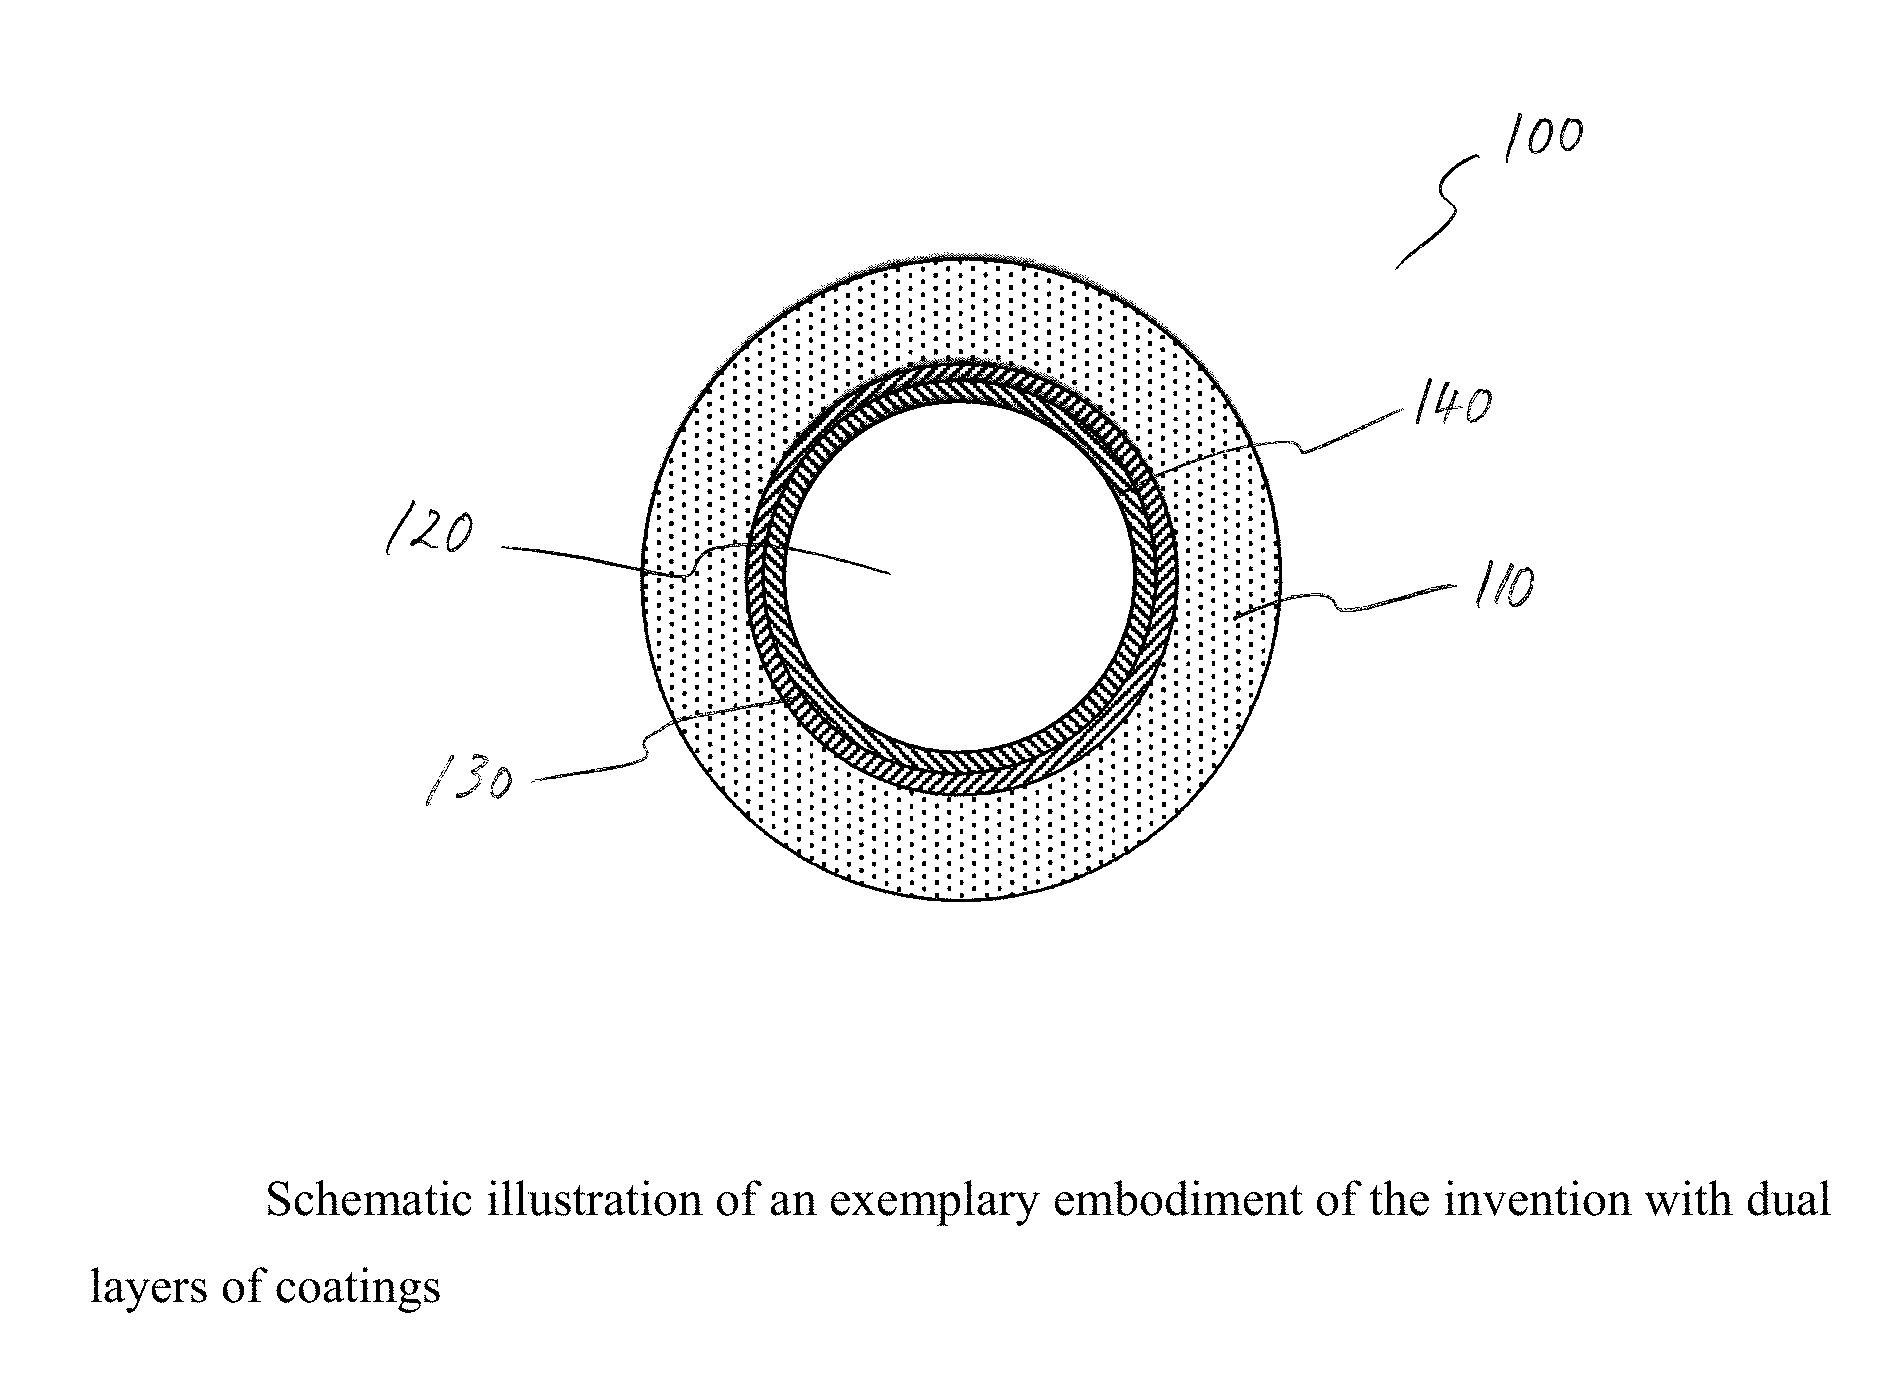 Metal components with inert vapor phase coating on internal surfaces